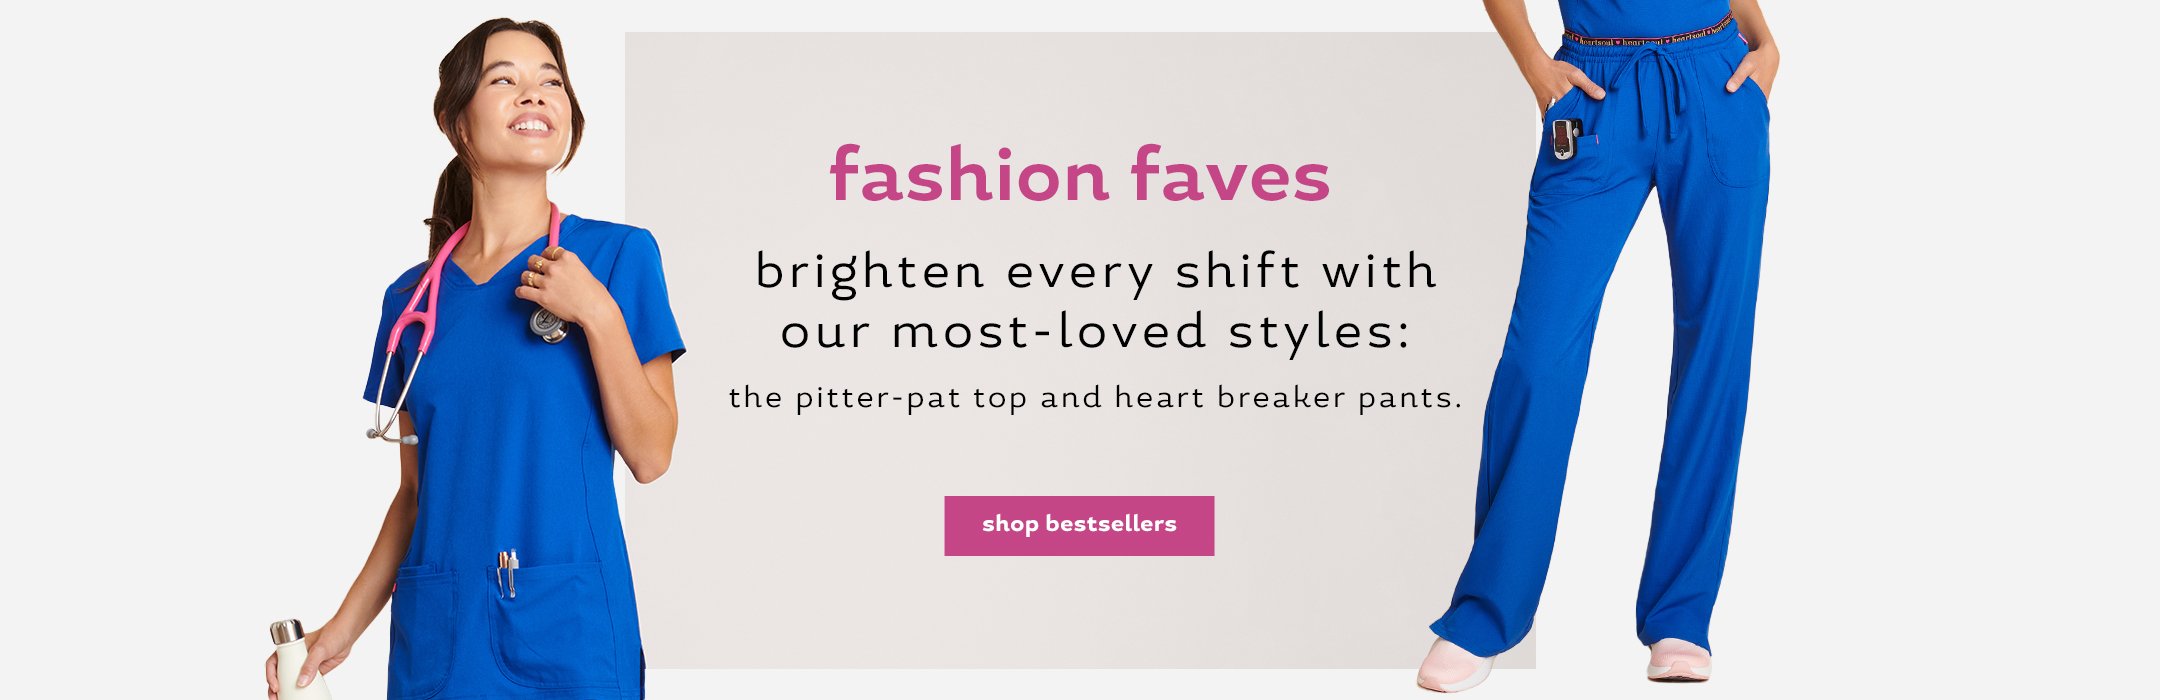 fashion faves
brighten every shift with our most-loved styles.